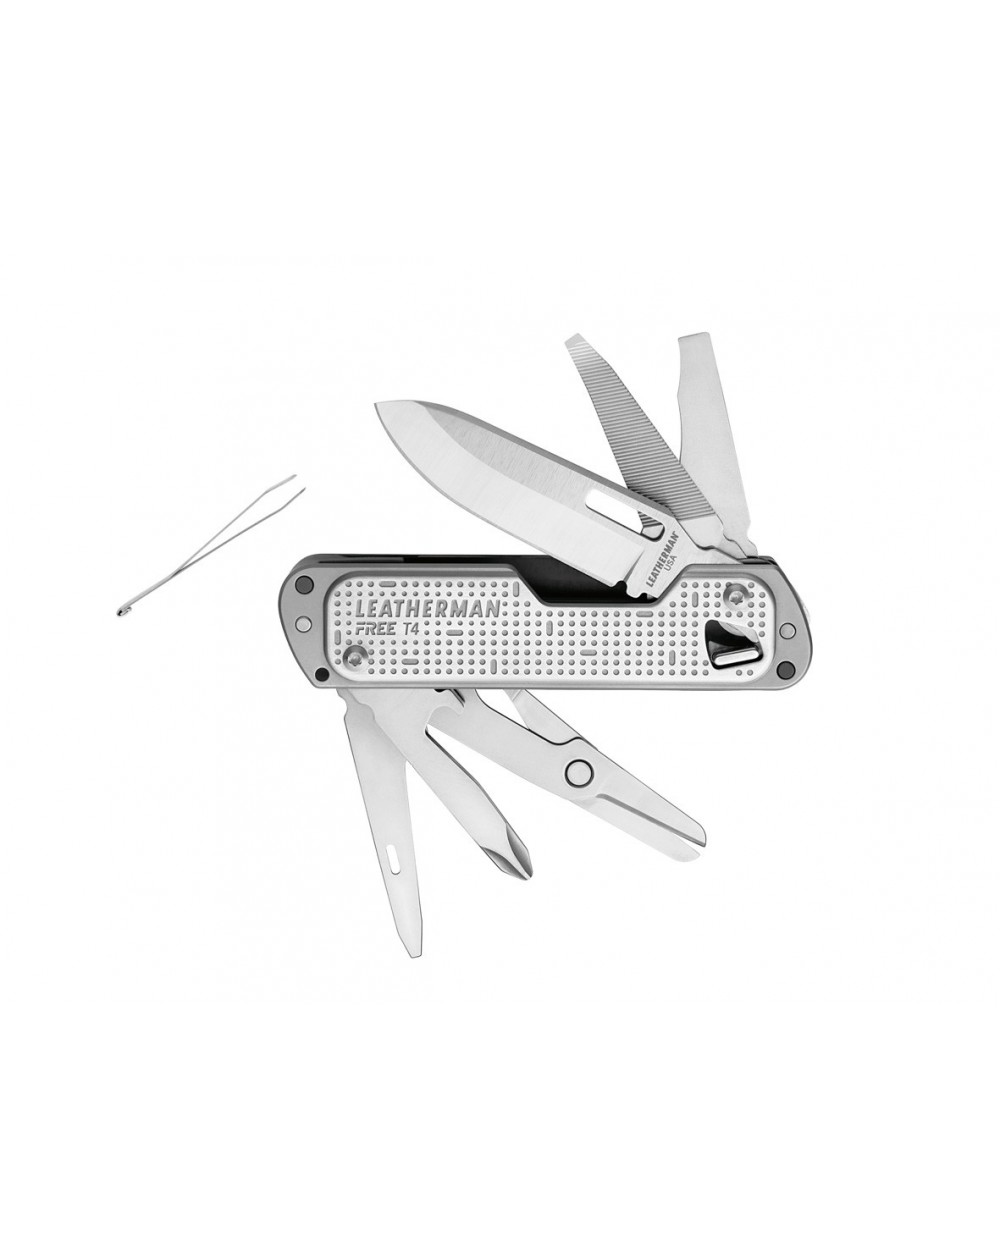 leatherman-pince-multifonctions-free-t4-832686-1